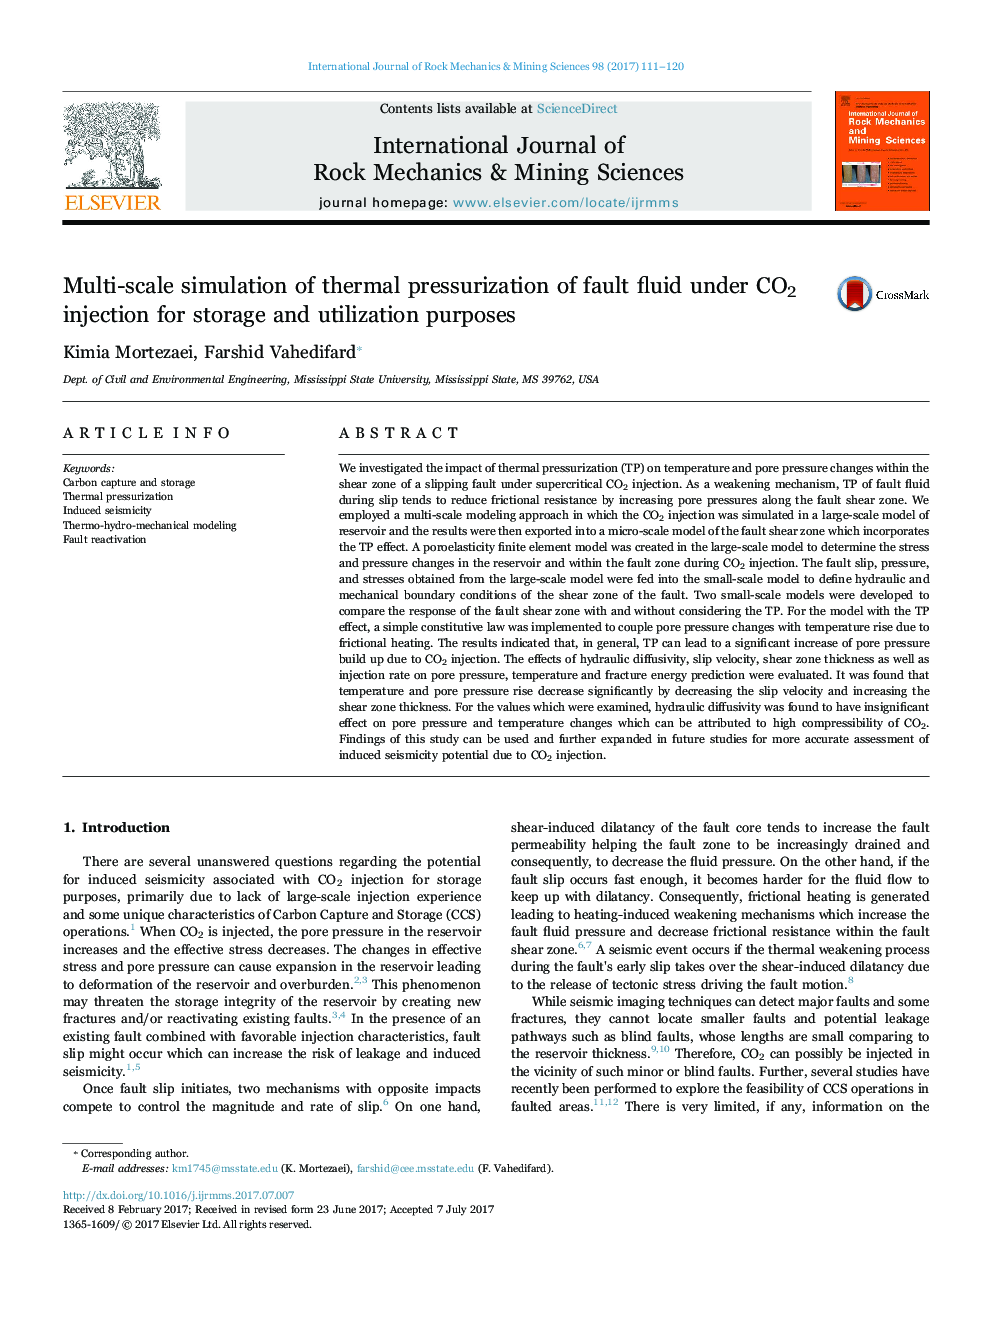 Multi-scale simulation of thermal pressurization of fault fluid under CO2 injection for storage and utilization purposes